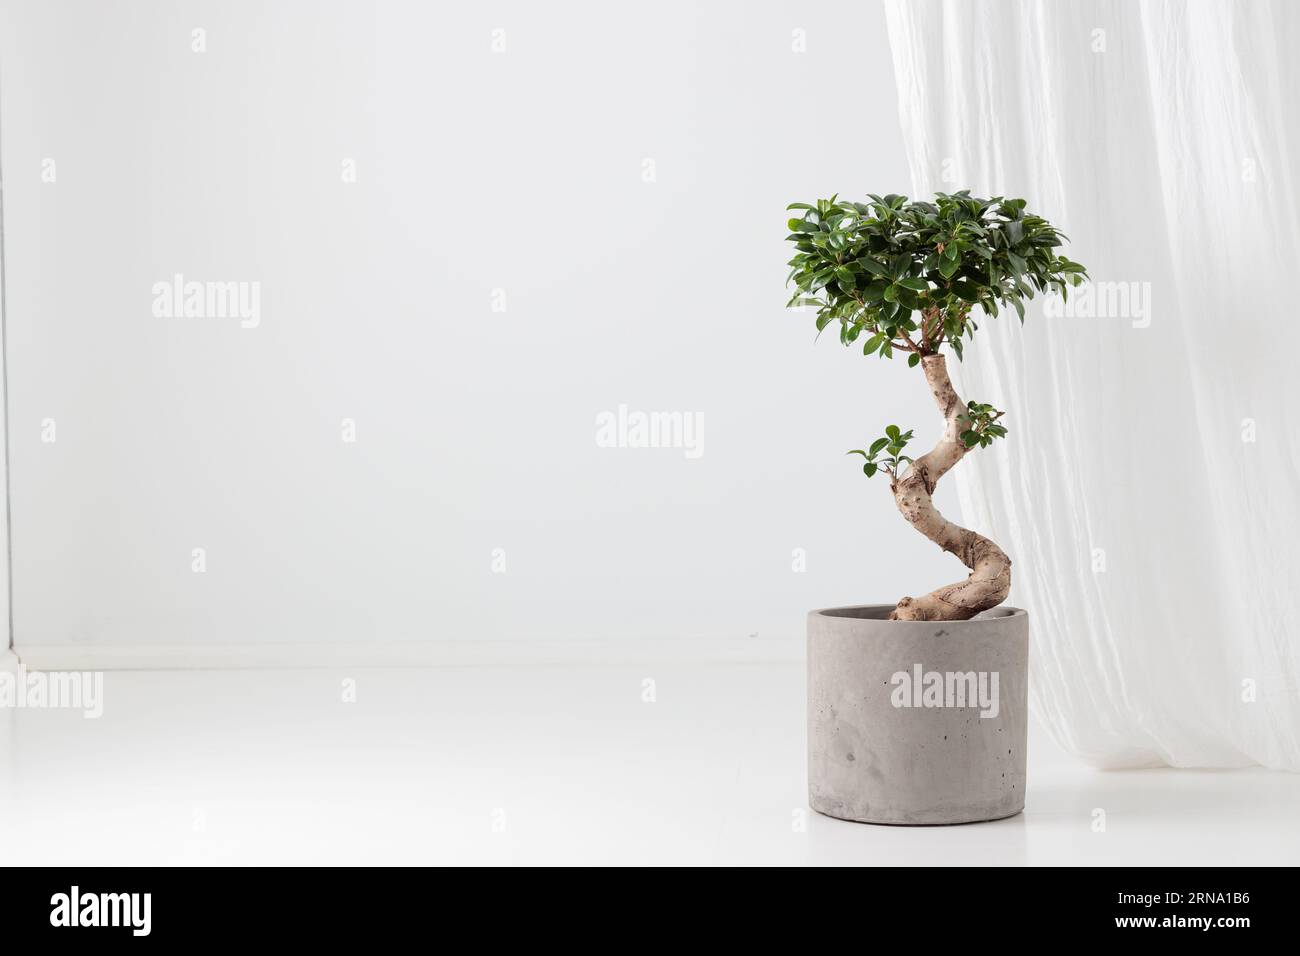 Ficus Ginseng in a concrete pot on the white background Stock Photo